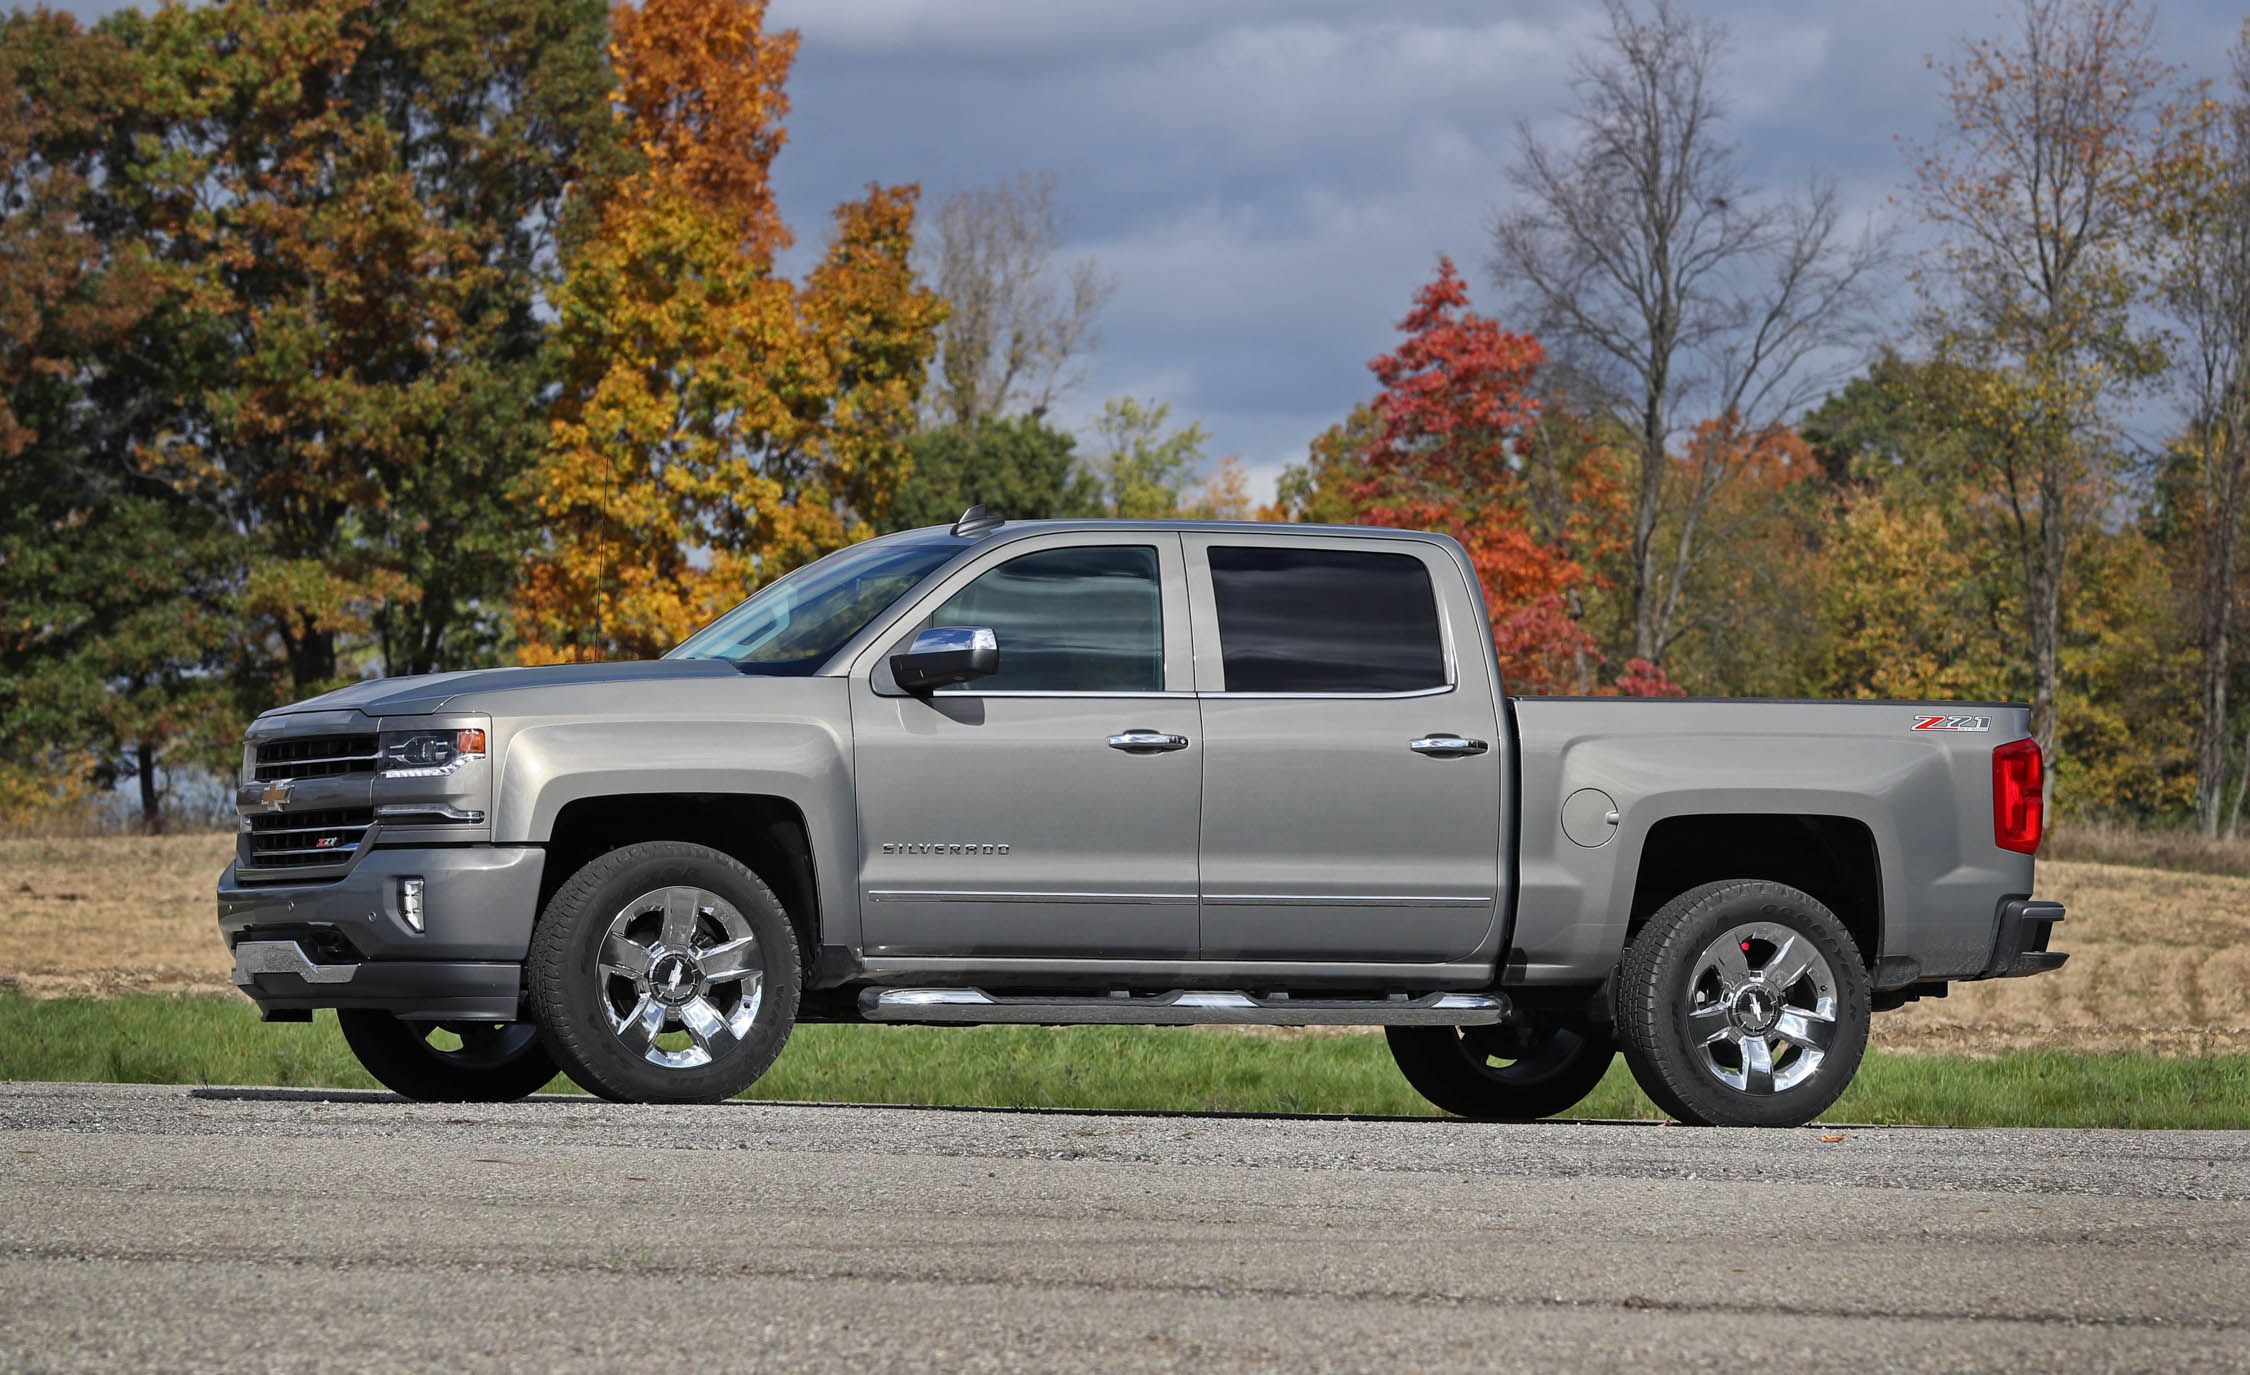 39 Awesome 2018 chevy silverado exterior colors Trend in This Years